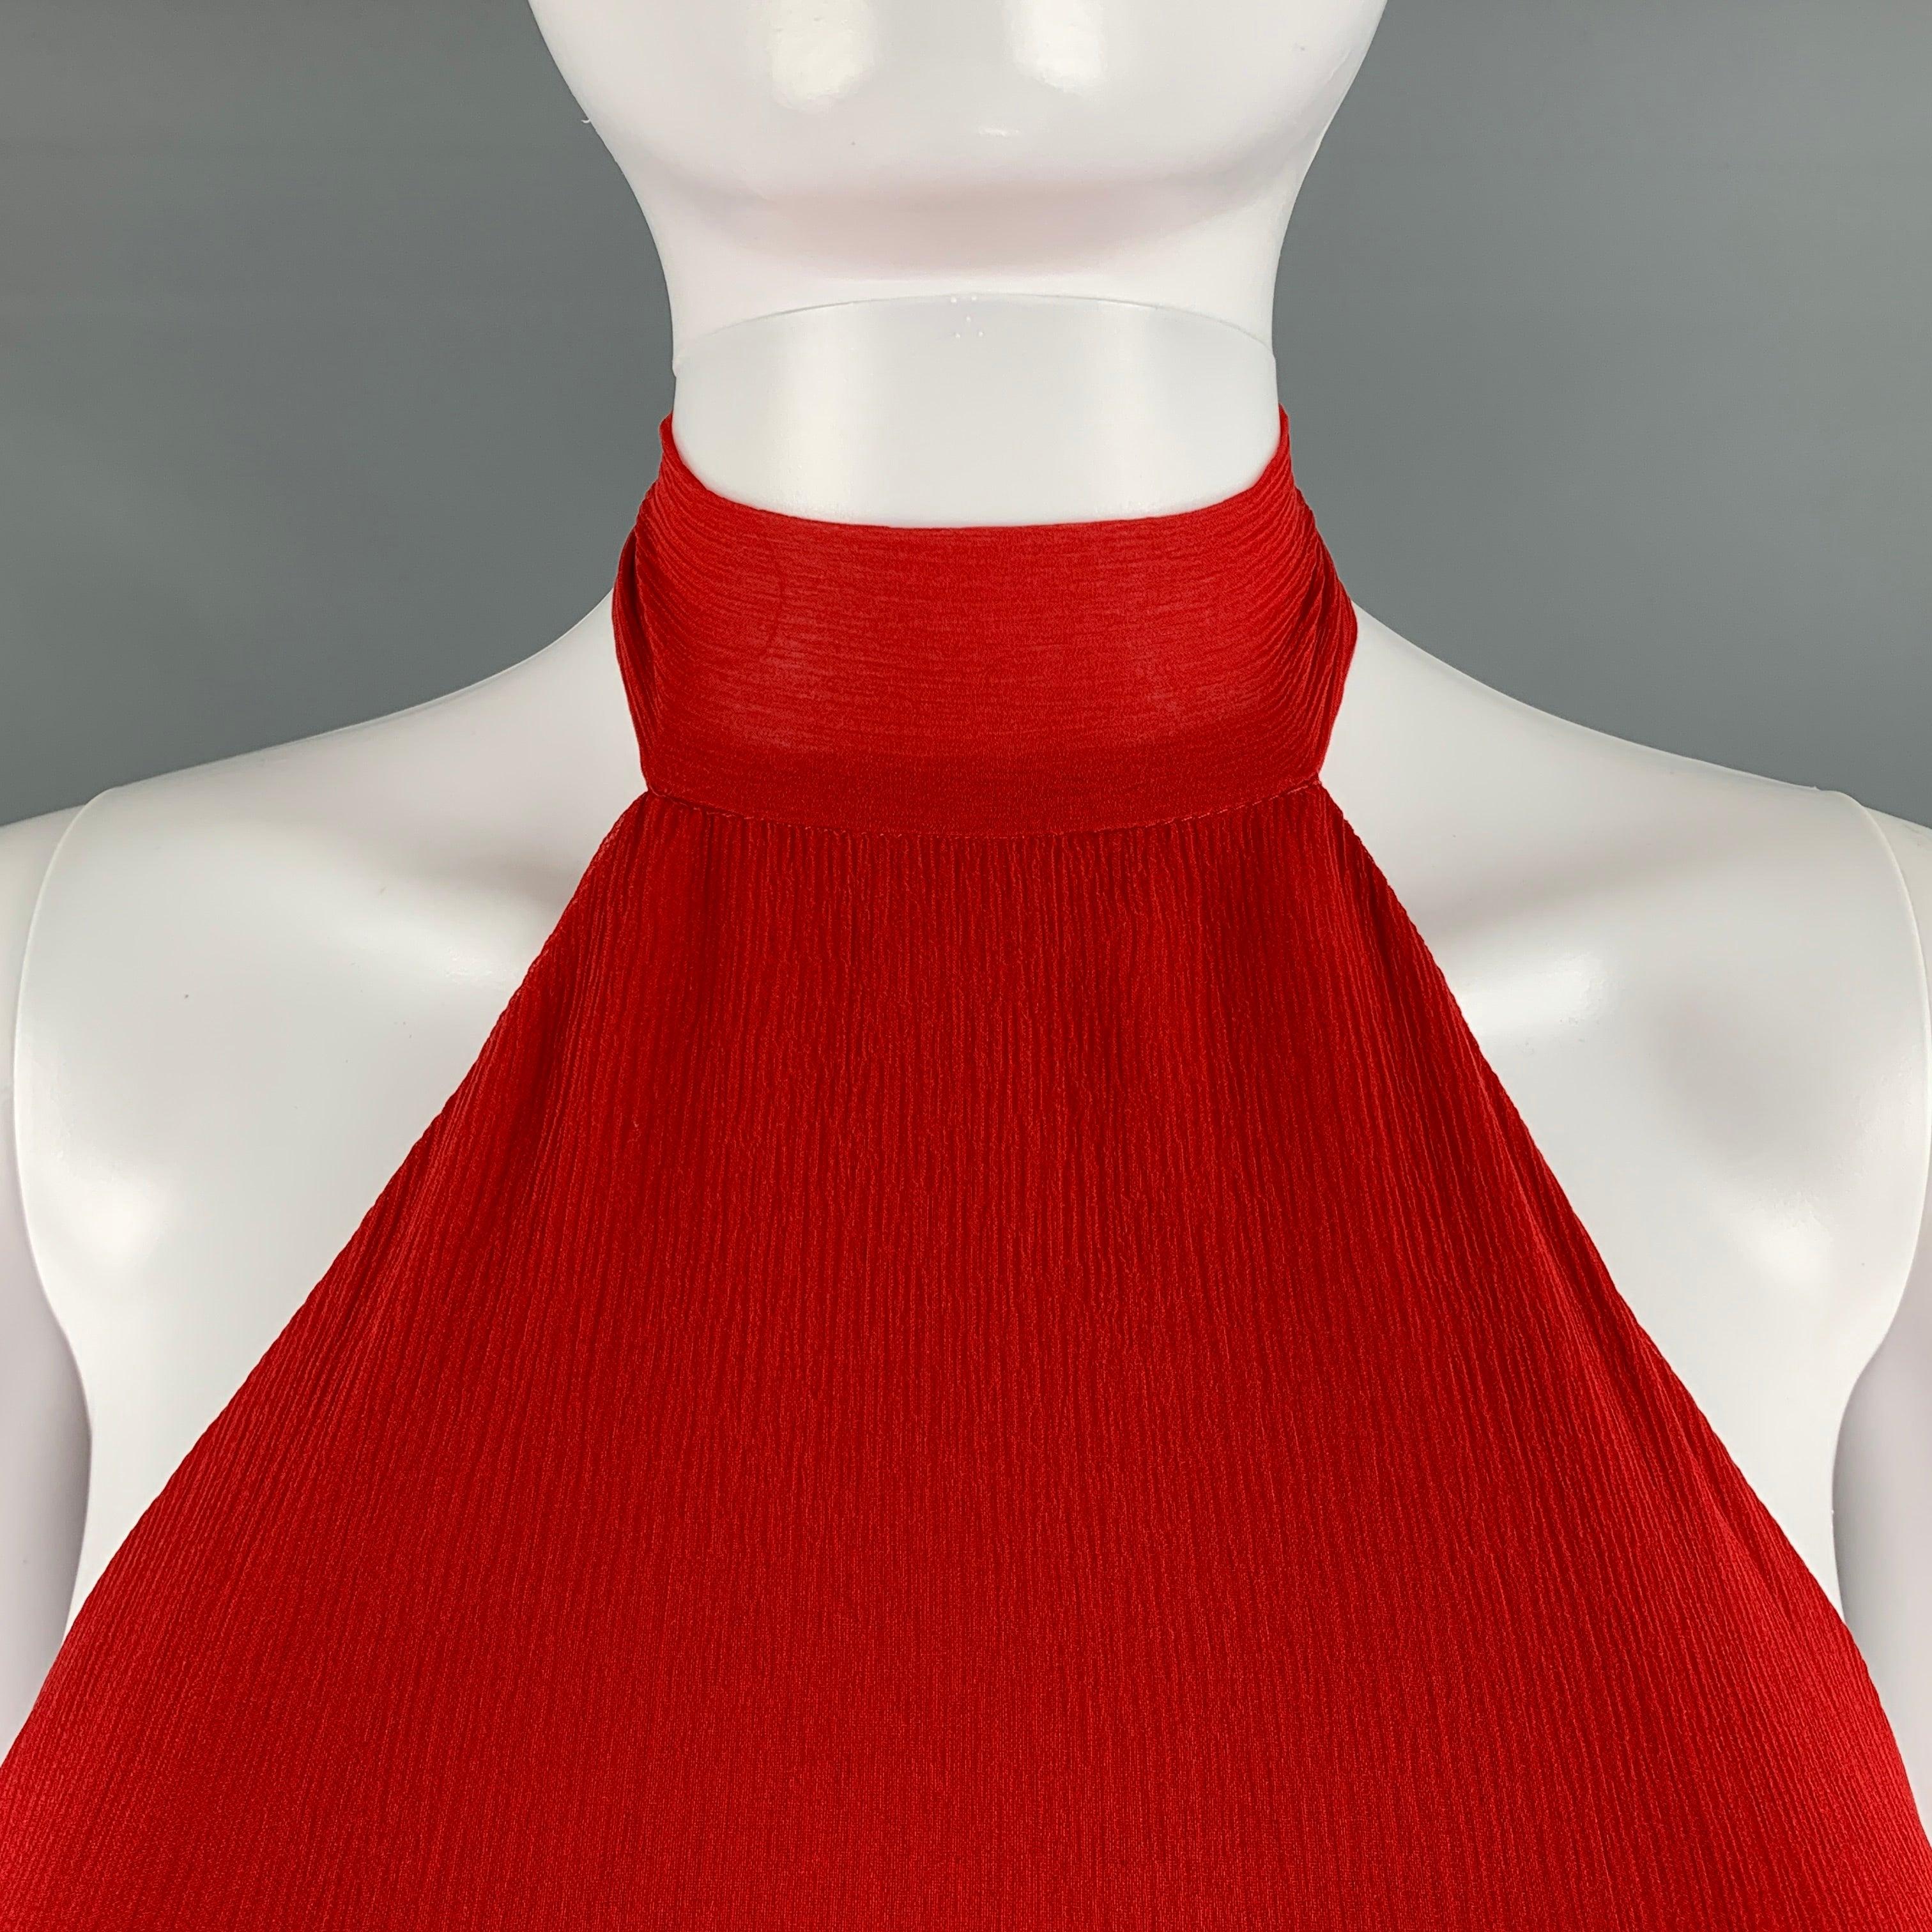 HALSTON gown comes in red silk pleated textured chiffon with a tied halter top. New with Tags. 

Marked:  
10 

Measurements: 
  Bust: 36 inches Waist: 25 inches Hip: 26 inches Length: 60 inches 
  
  
 
Reference No.: 128774
Category: Gown/Evening